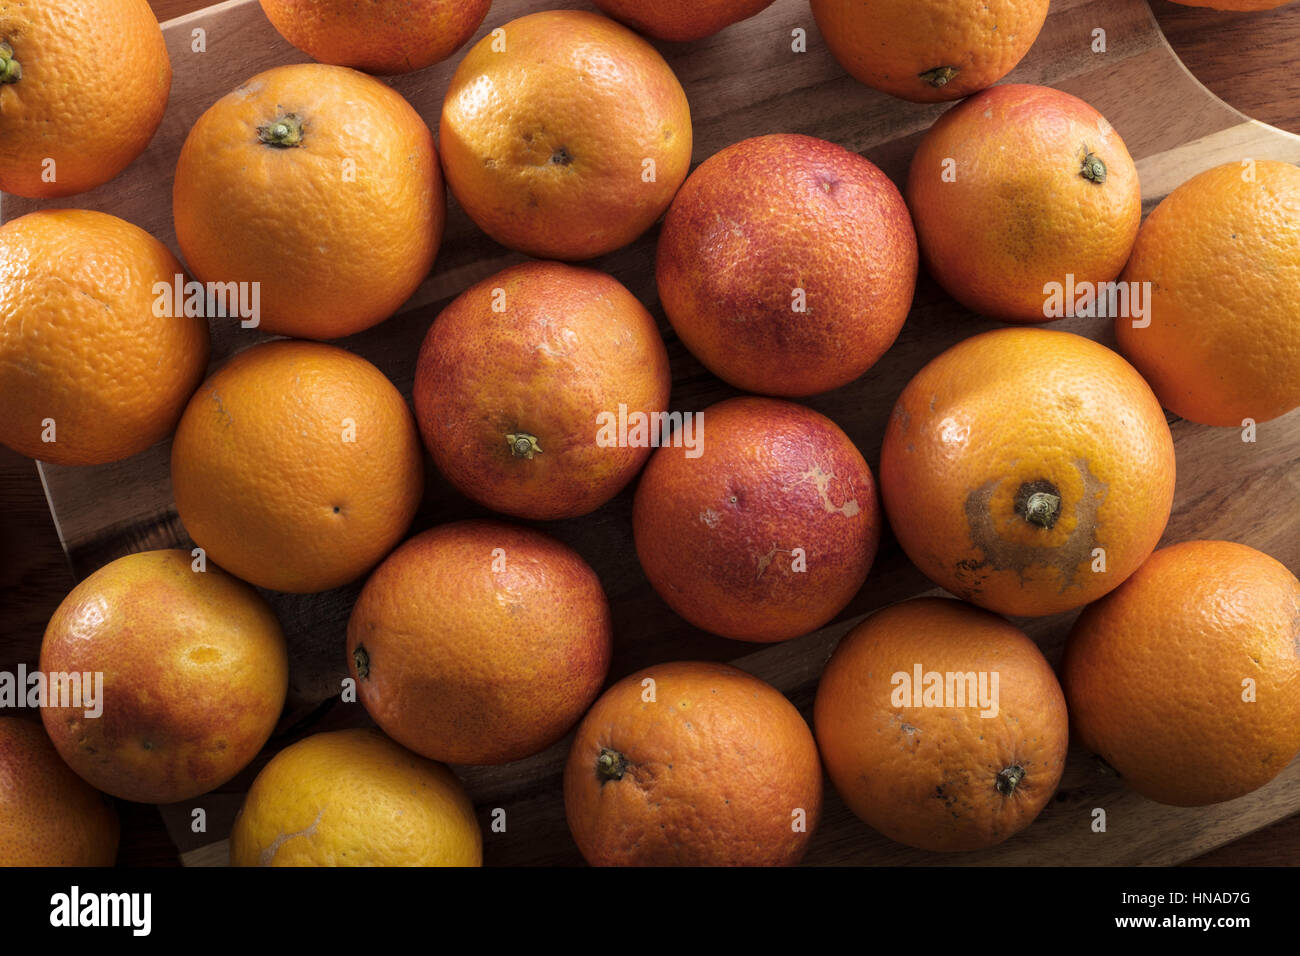 Over a dozen red oranges on cutting board Stock Photo